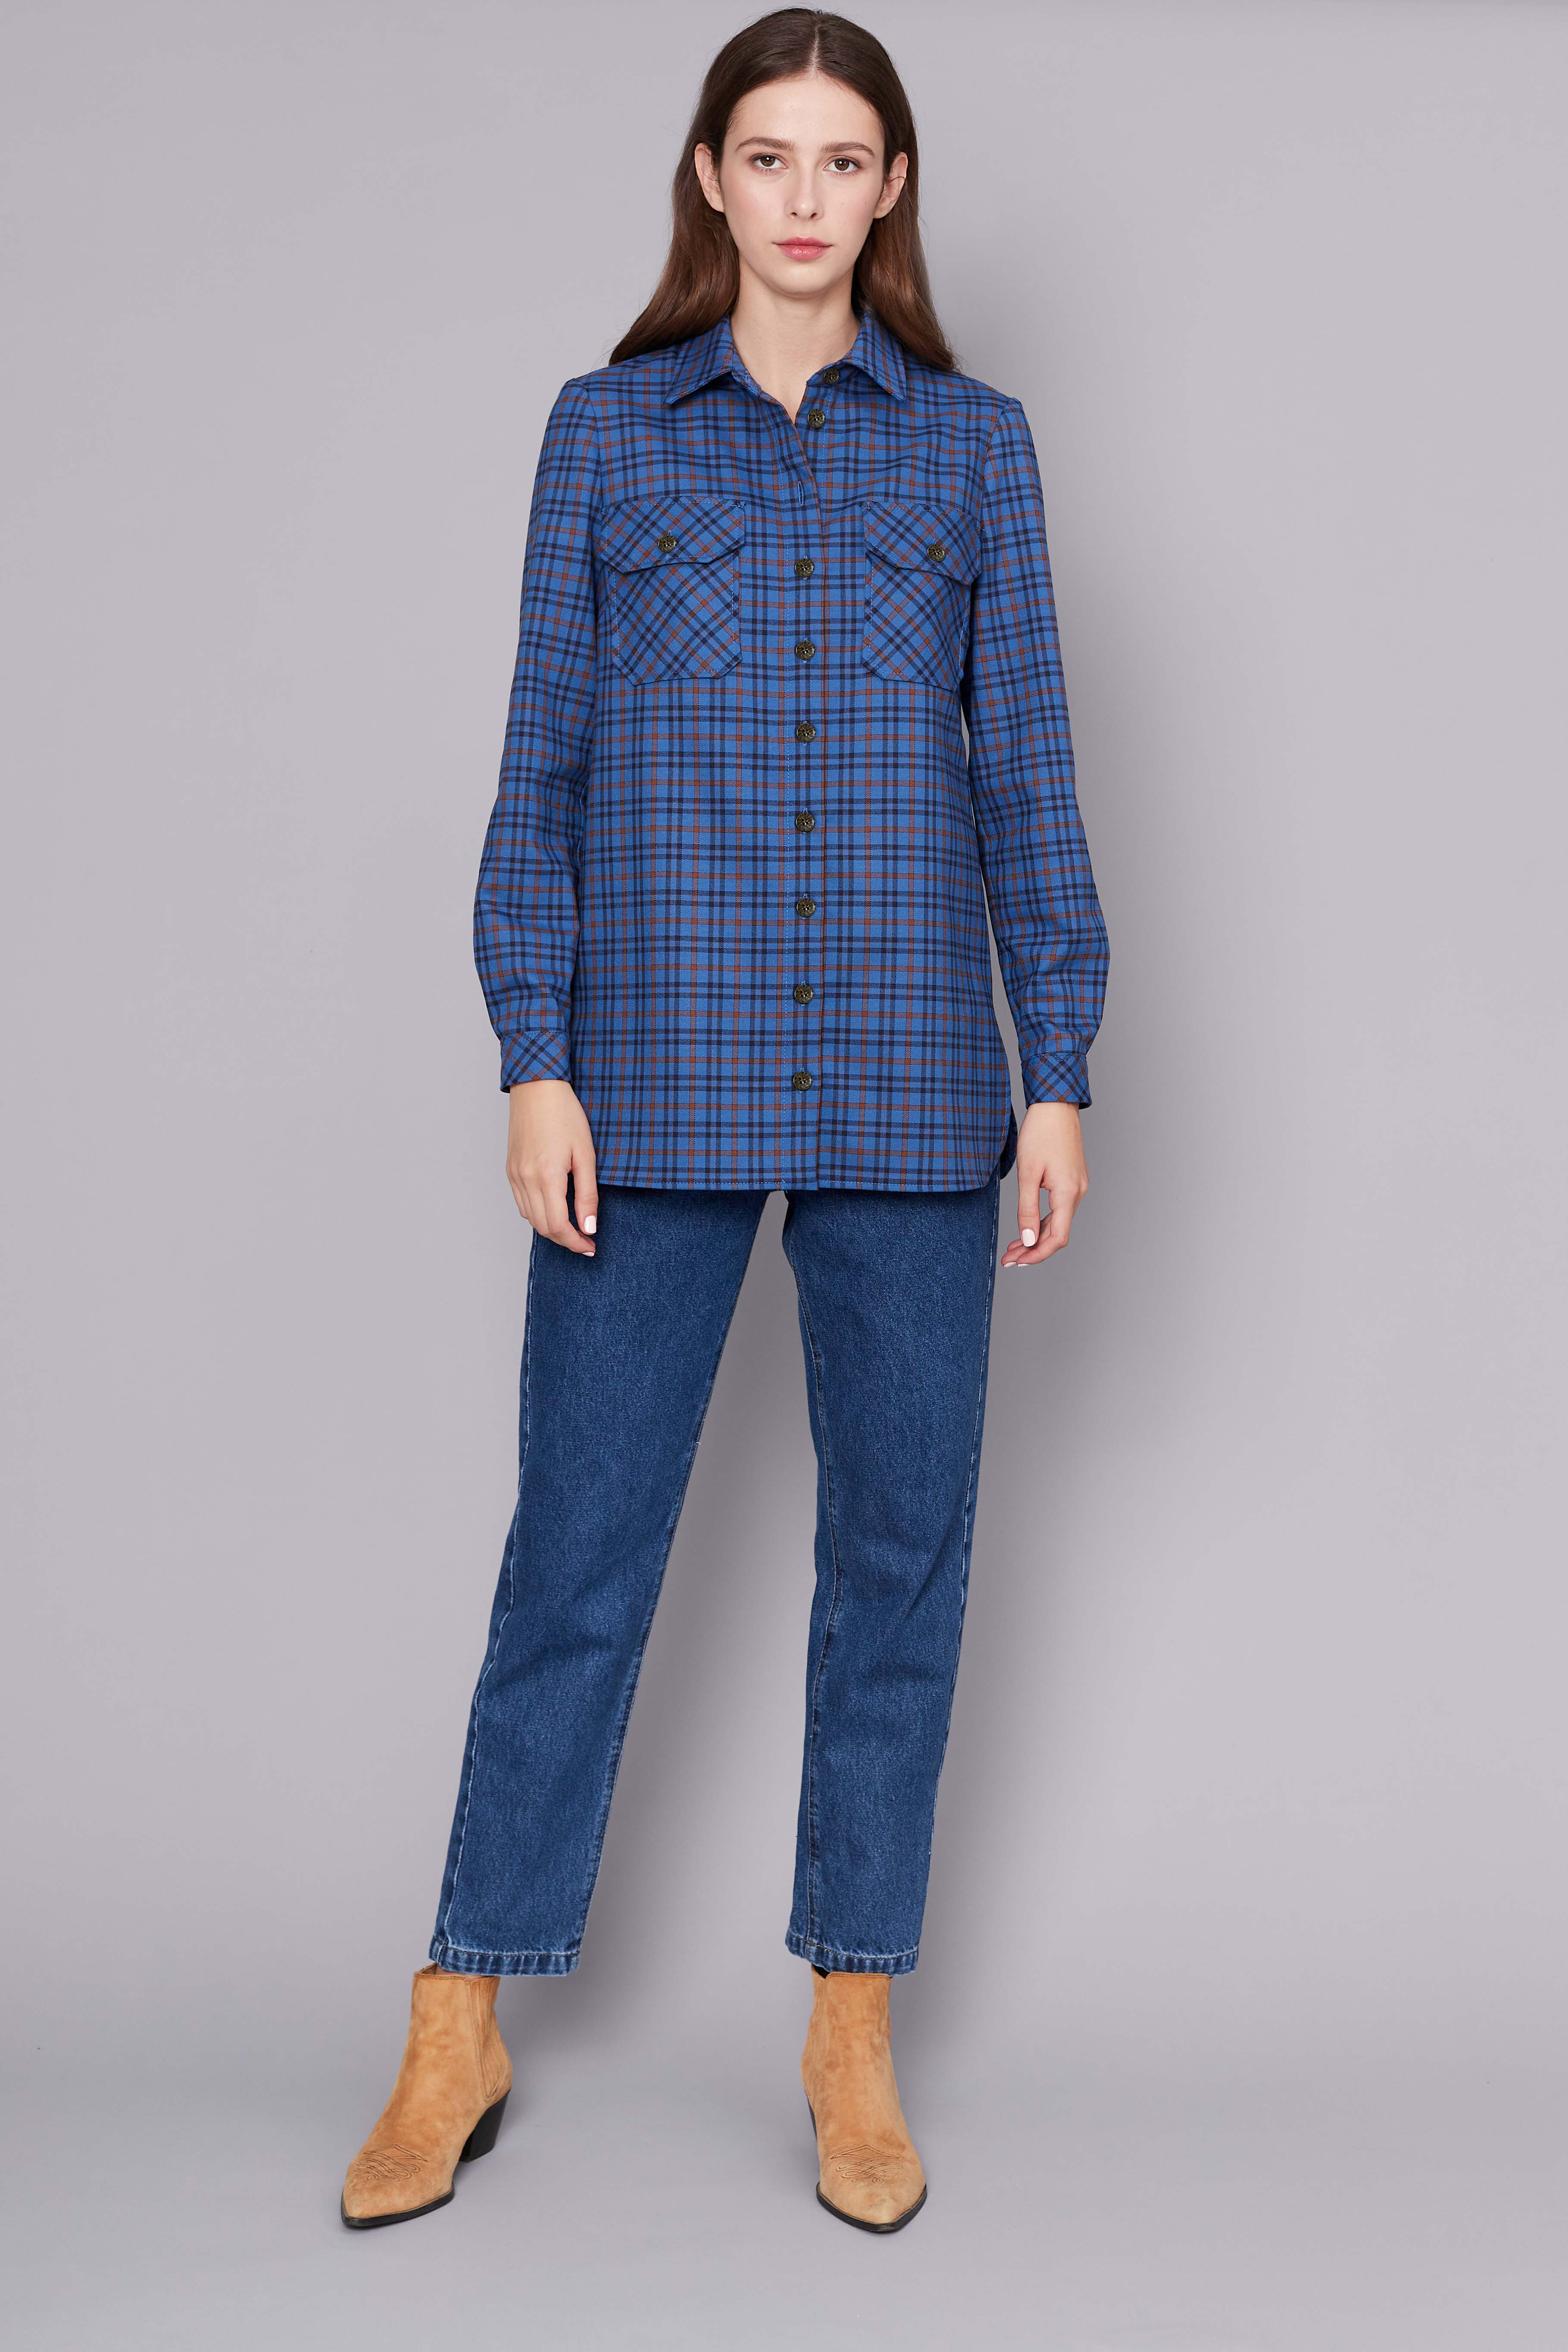 Blue checkered shirt with pockets, photo 2